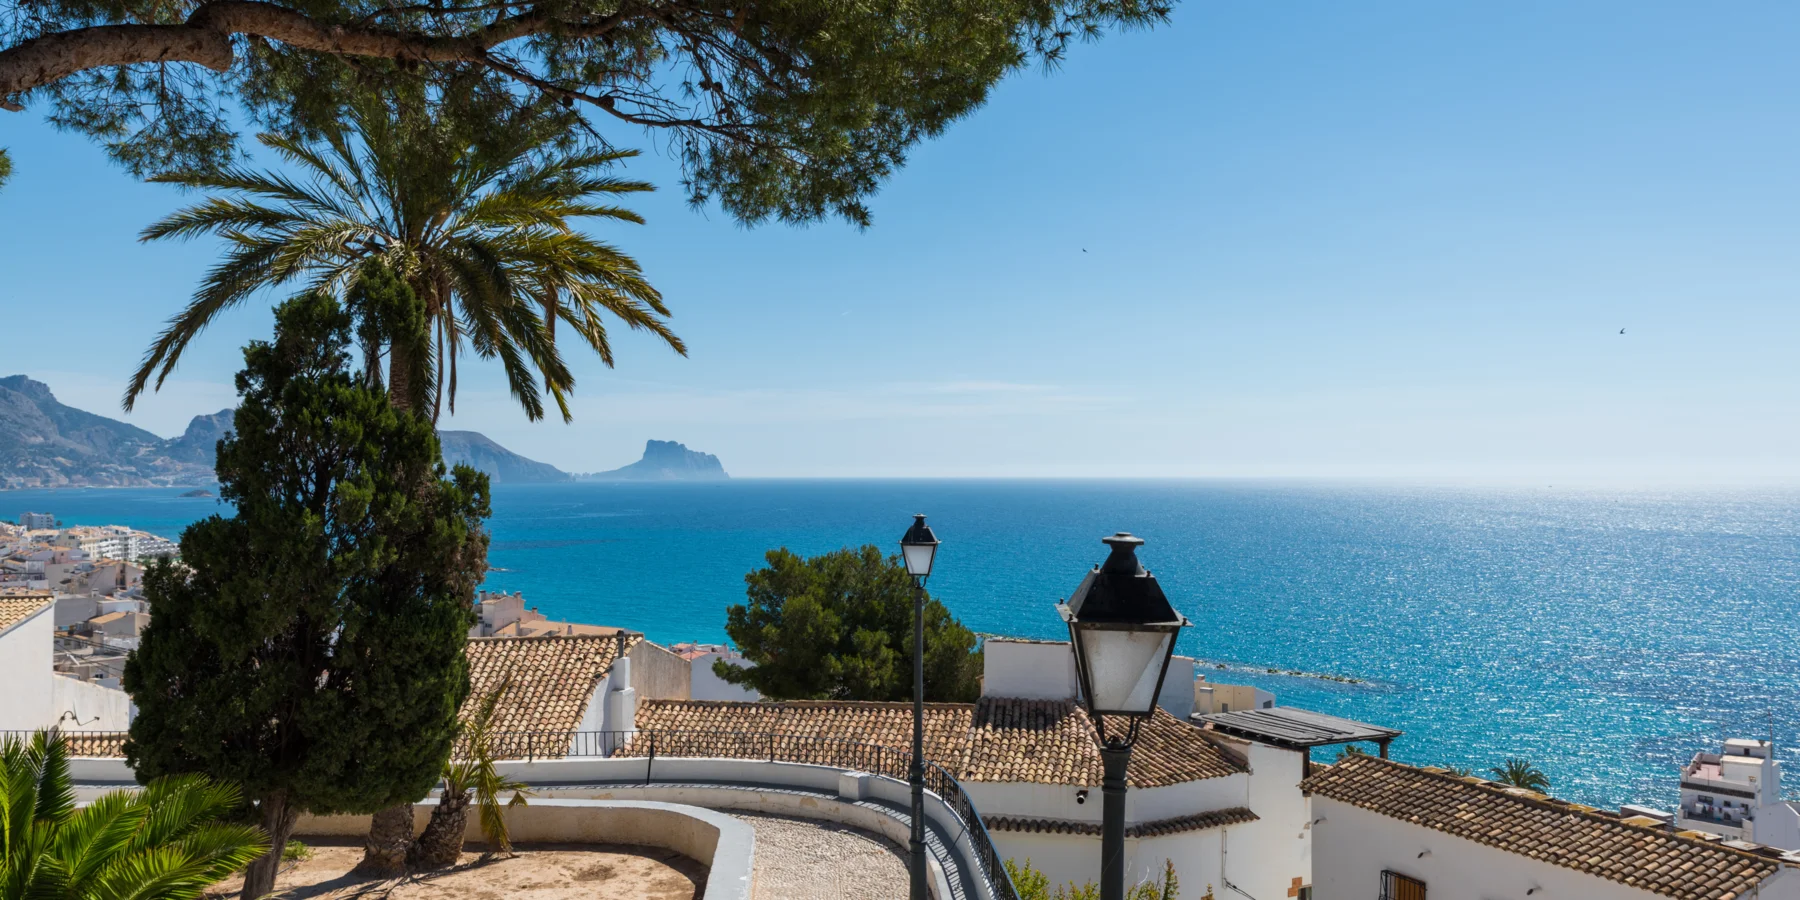 Beautiful views from the old town of Altea